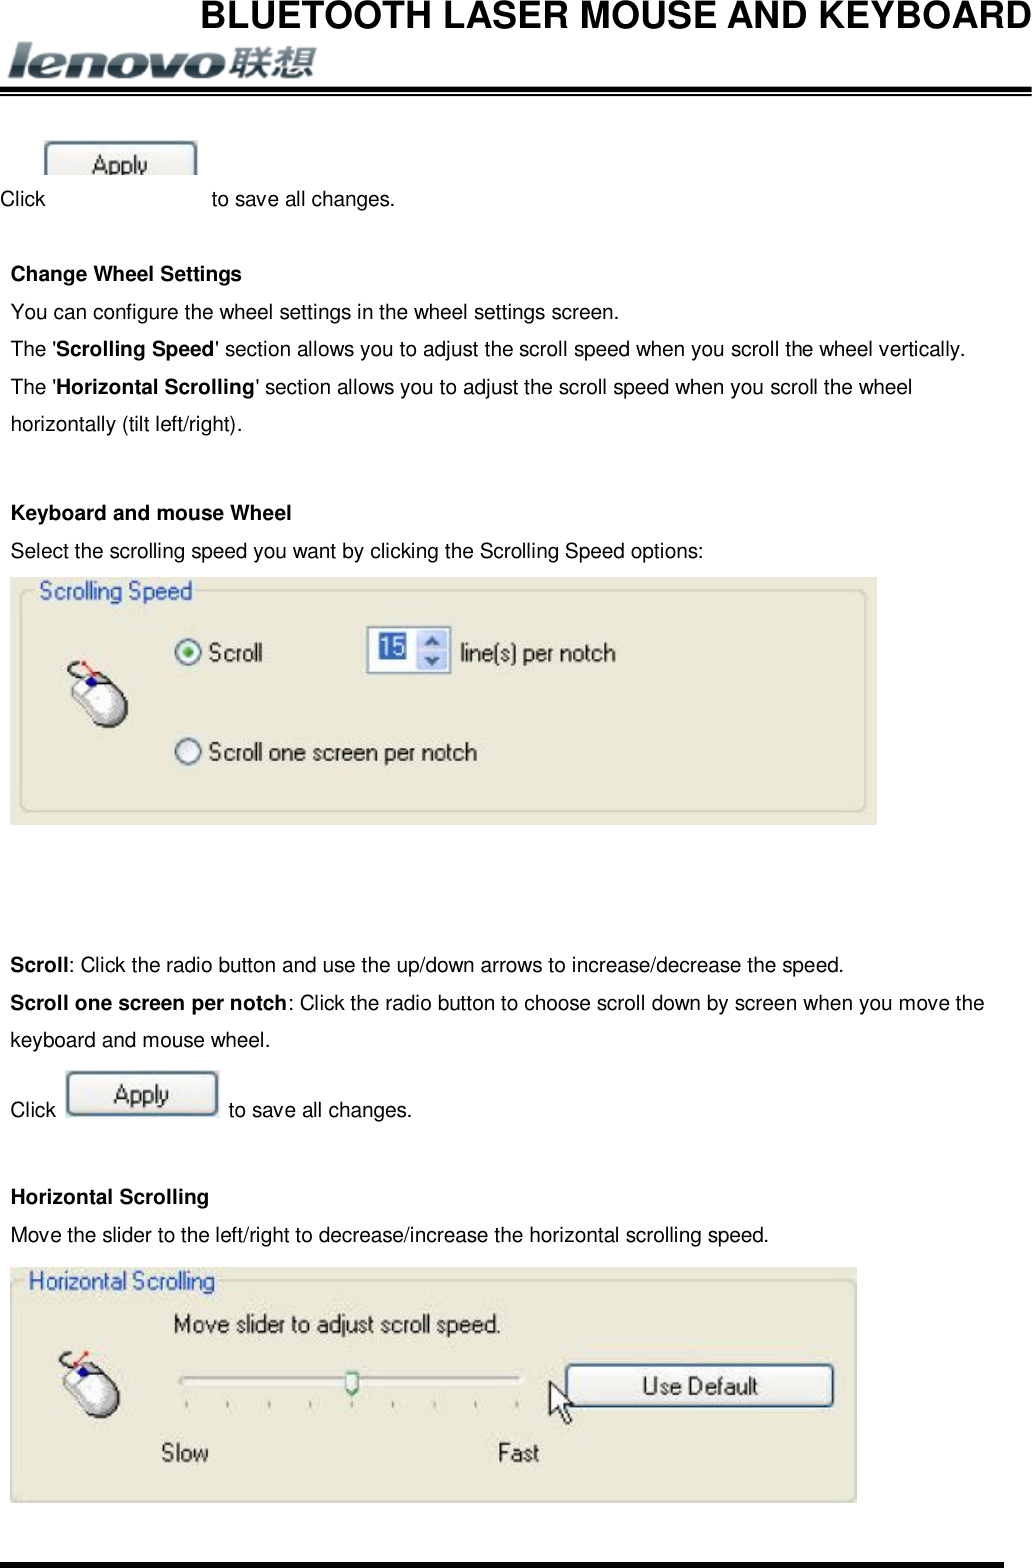 BLUETOOTH LASER MOUSE AND KEYBOARD          Click  to save all changes.  Change Wheel Settings You can configure the wheel settings in the wheel settings screen. The &apos;Scrolling Speed&apos; section allows you to adjust the scroll speed when you scroll the wheel vertically. The &apos;Horizontal Scrolling&apos; section allows you to adjust the scroll speed when you scroll the wheel horizontally (tilt left/right).  Keyboard and mouse Wheel Select the scrolling speed you want by clicking the Scrolling Speed options:     Scroll: Click the radio button and use the up/down arrows to increase/decrease the speed. Scroll one screen per notch: Click the radio button to choose scroll down by screen when you move the keyboard and mouse wheel. Click   to save all changes.  Horizontal Scrolling Move the slider to the left/right to decrease/increase the horizontal scrolling speed.  